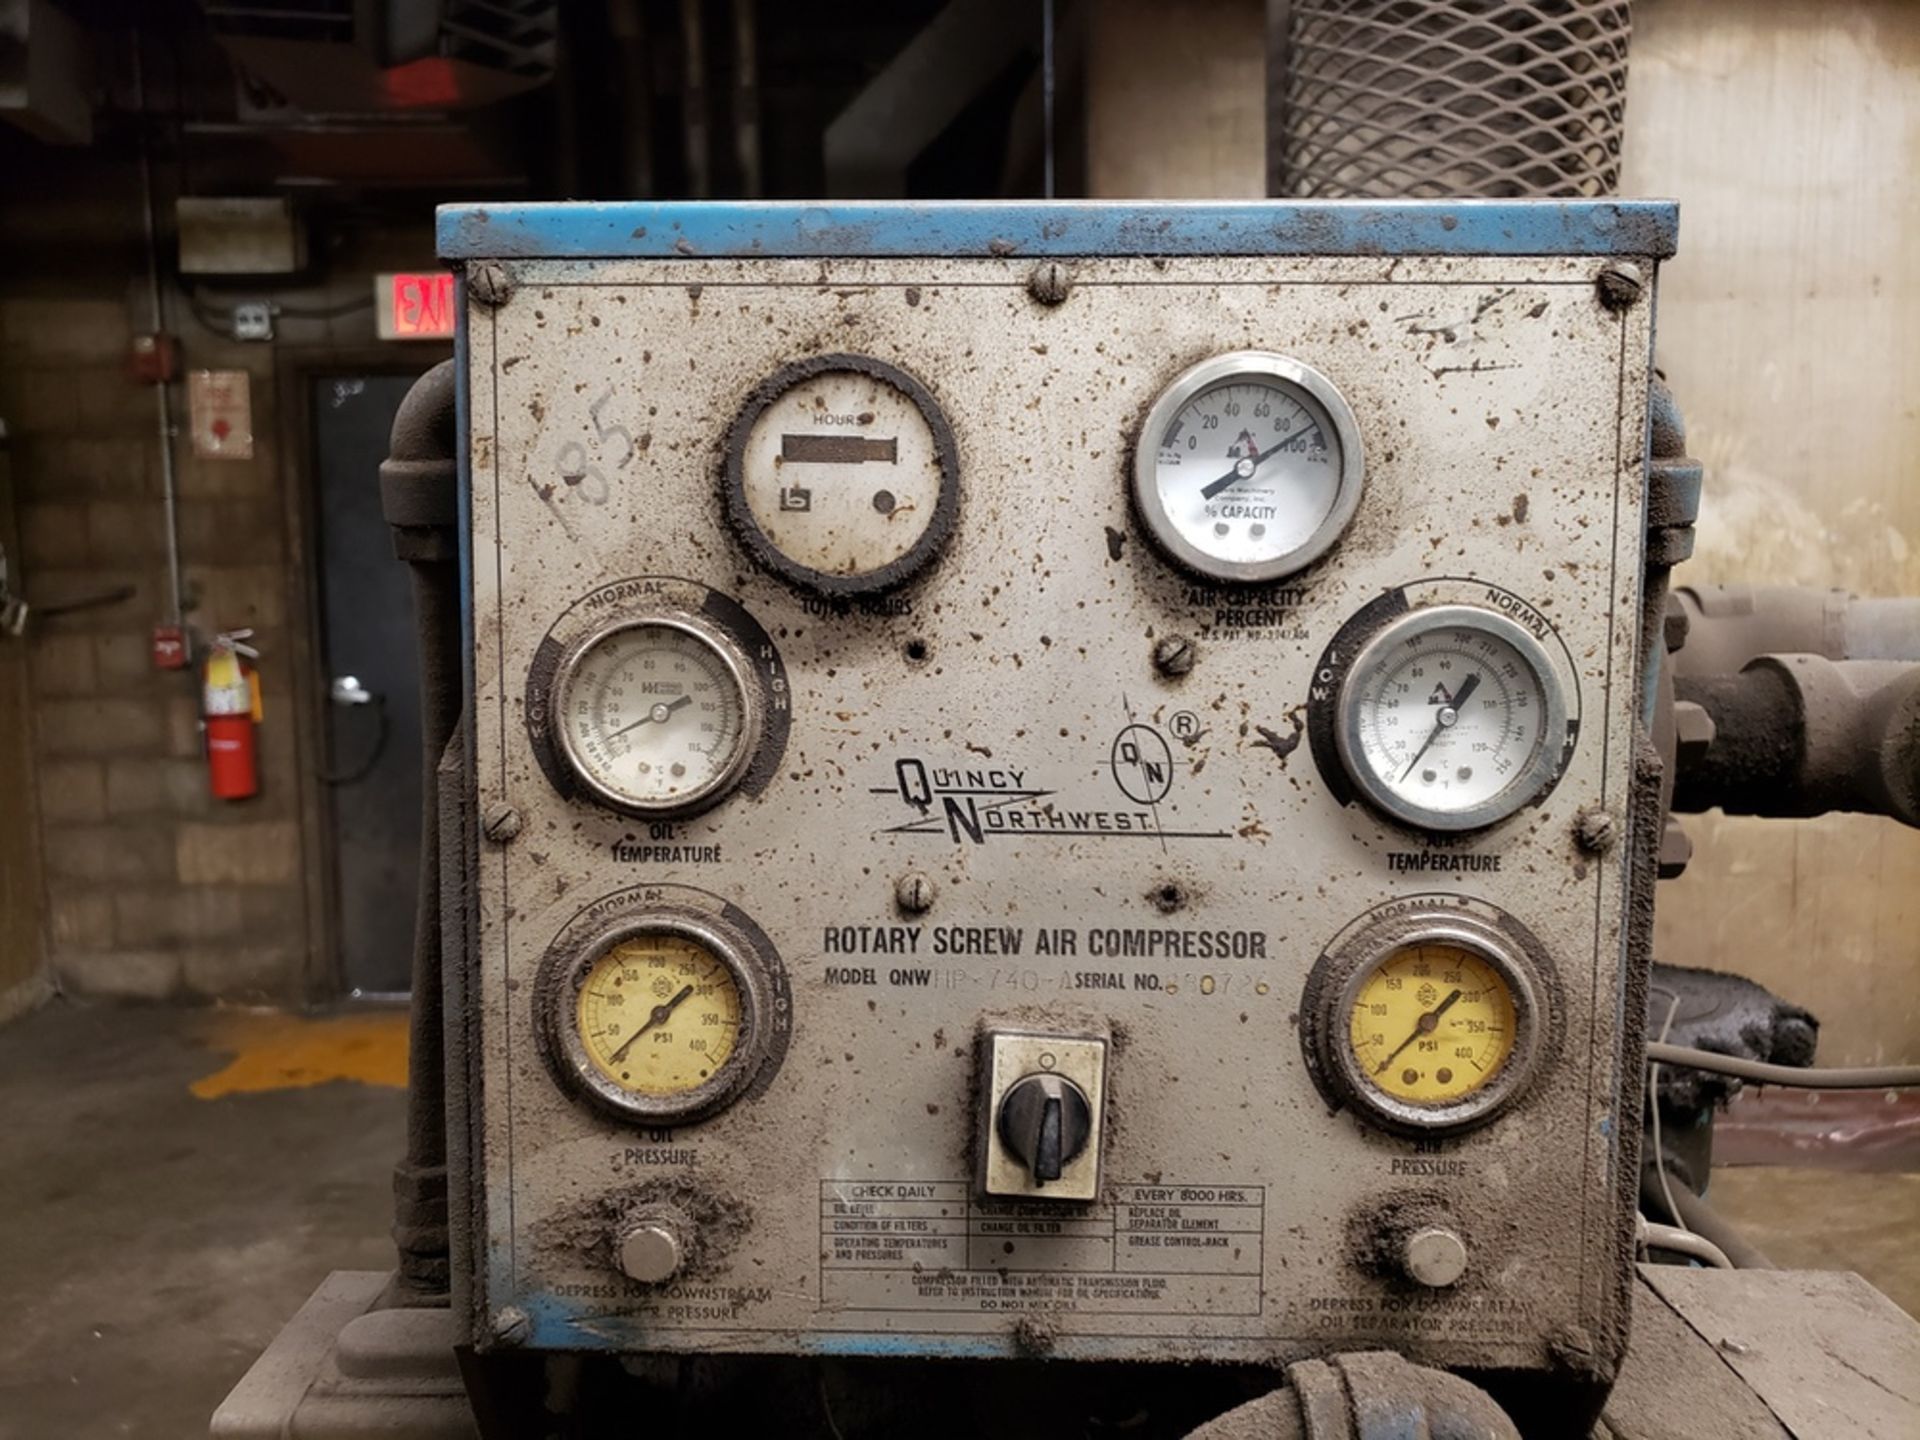 Quincy Rotary Screw Air Compressor, M# HP-740-A, S/N 880726 | Rig Fee: $750 - Image 2 of 5